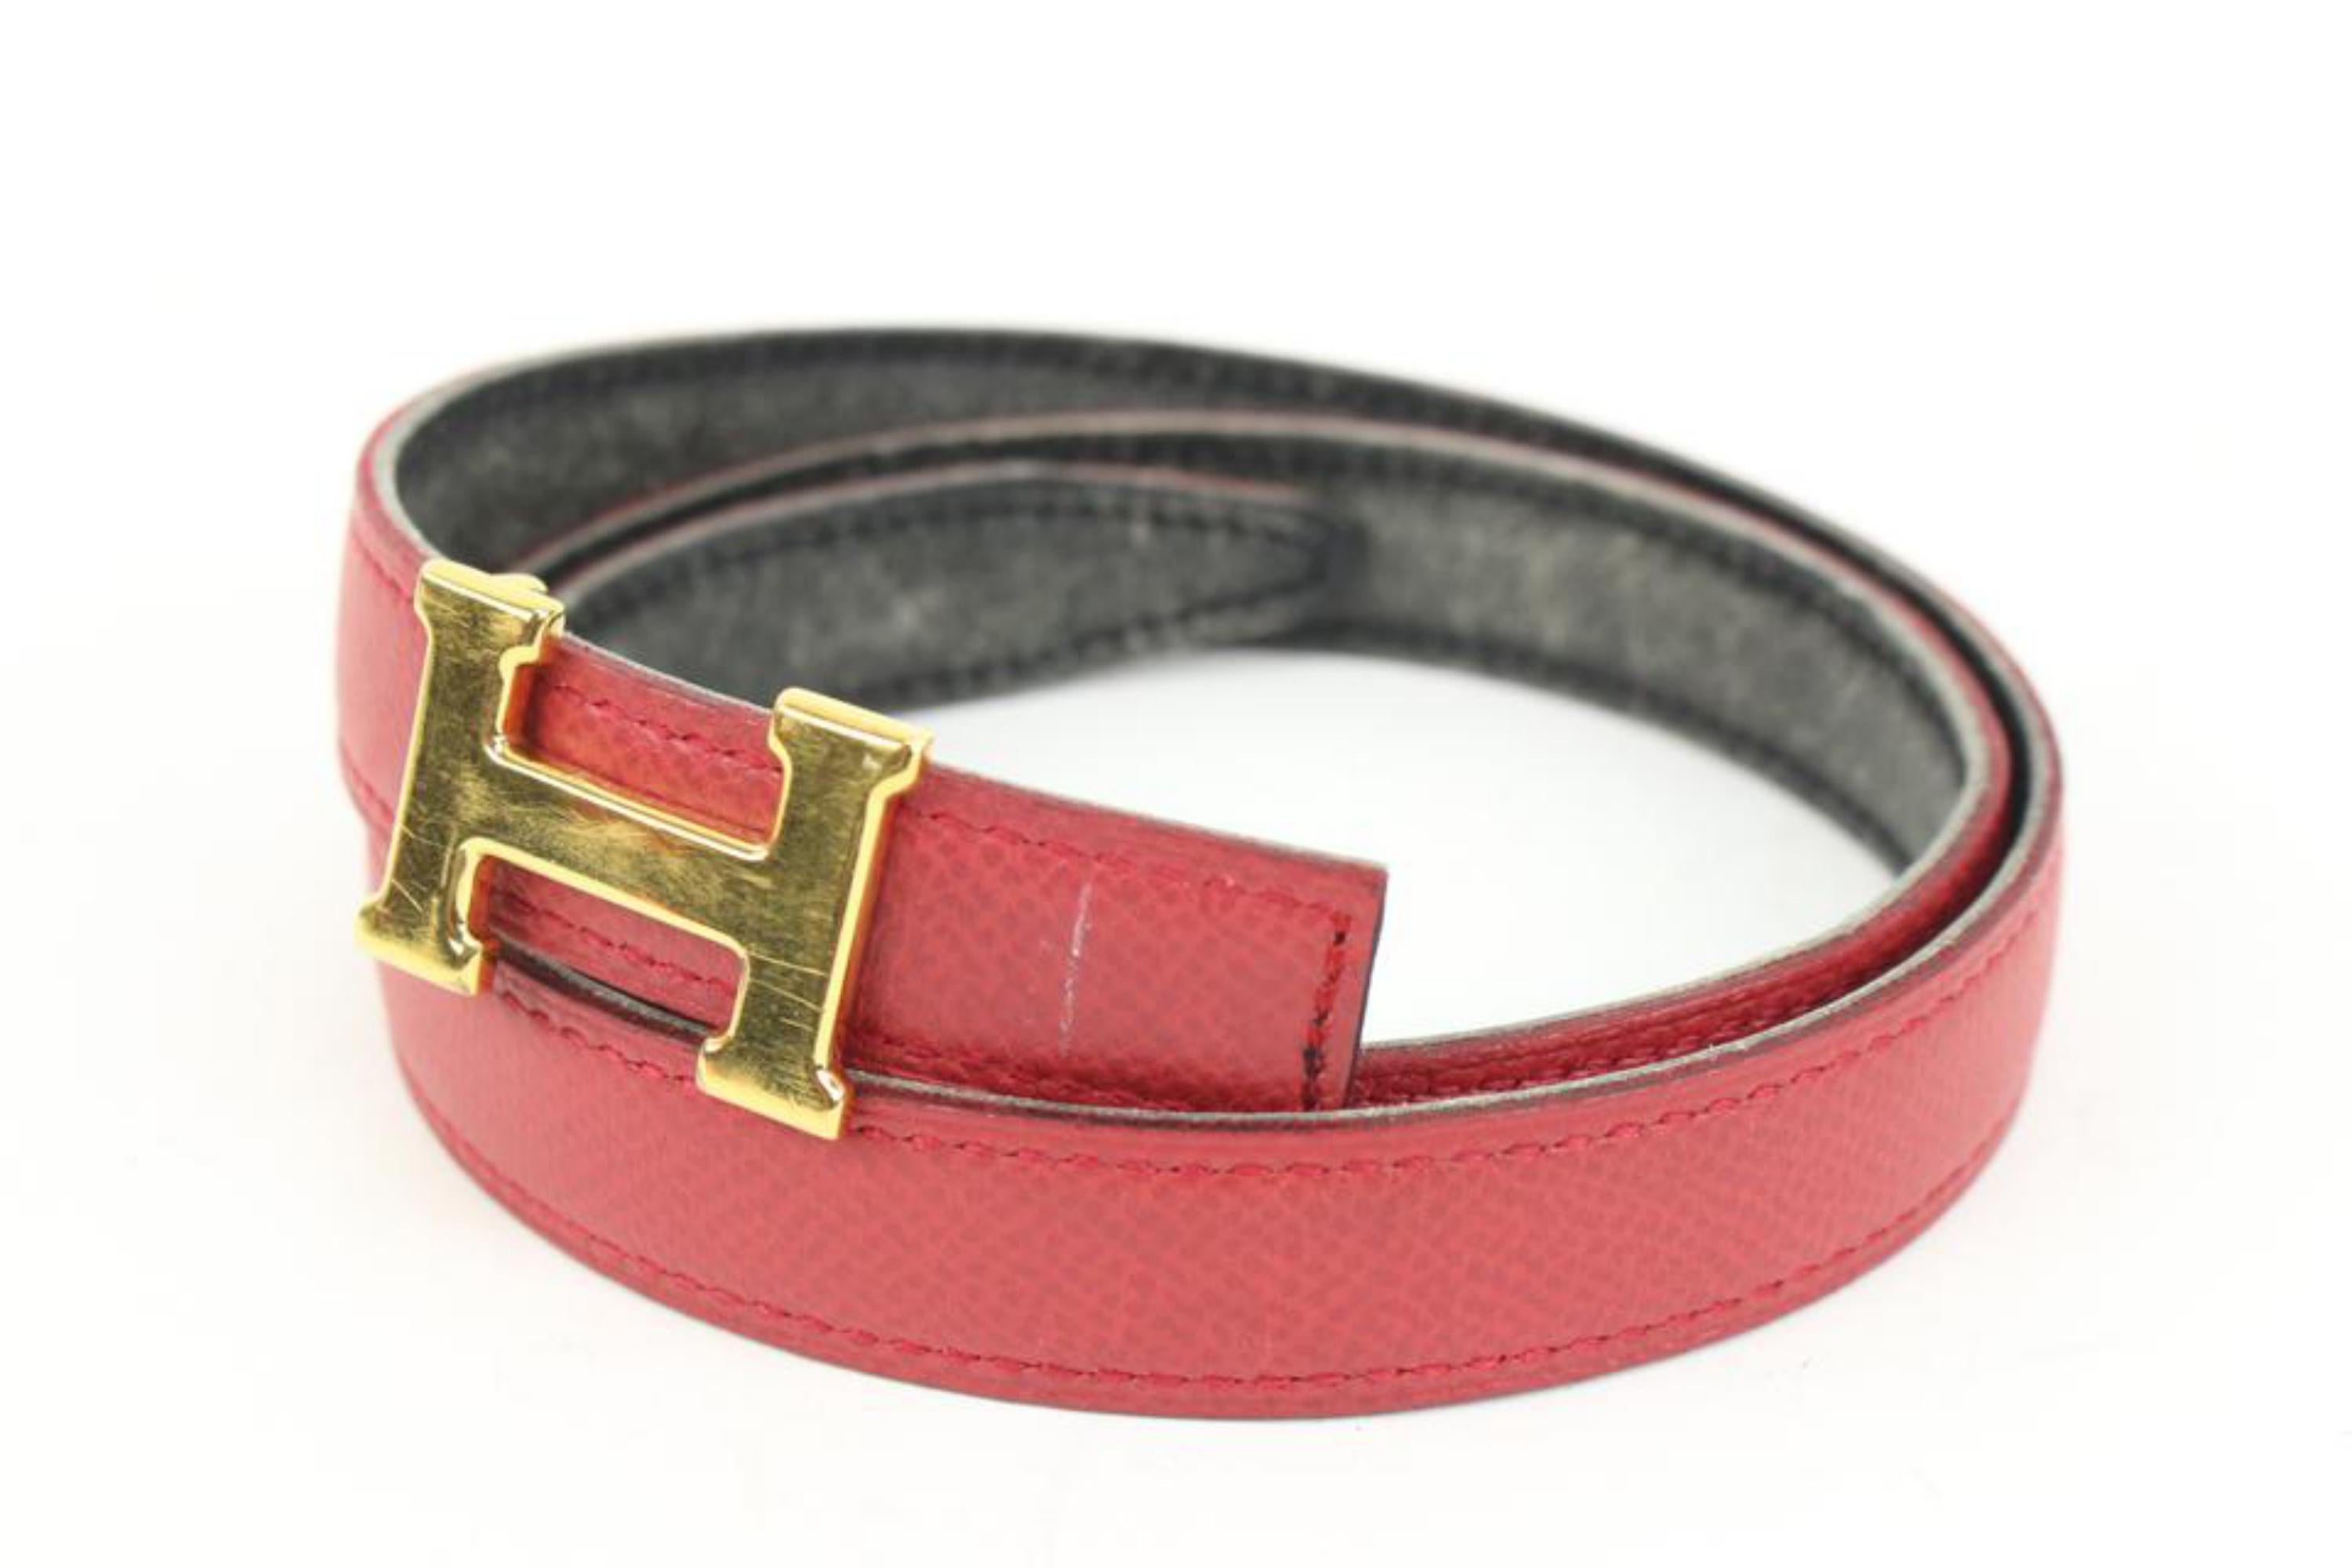 Hermès 18mm Gold x Black x Red Reversible H Logo Thin Belt Kit 25h321s
Date Code/Serial Number: Z in a Circle
Made In: France
Measurements: Length:  32